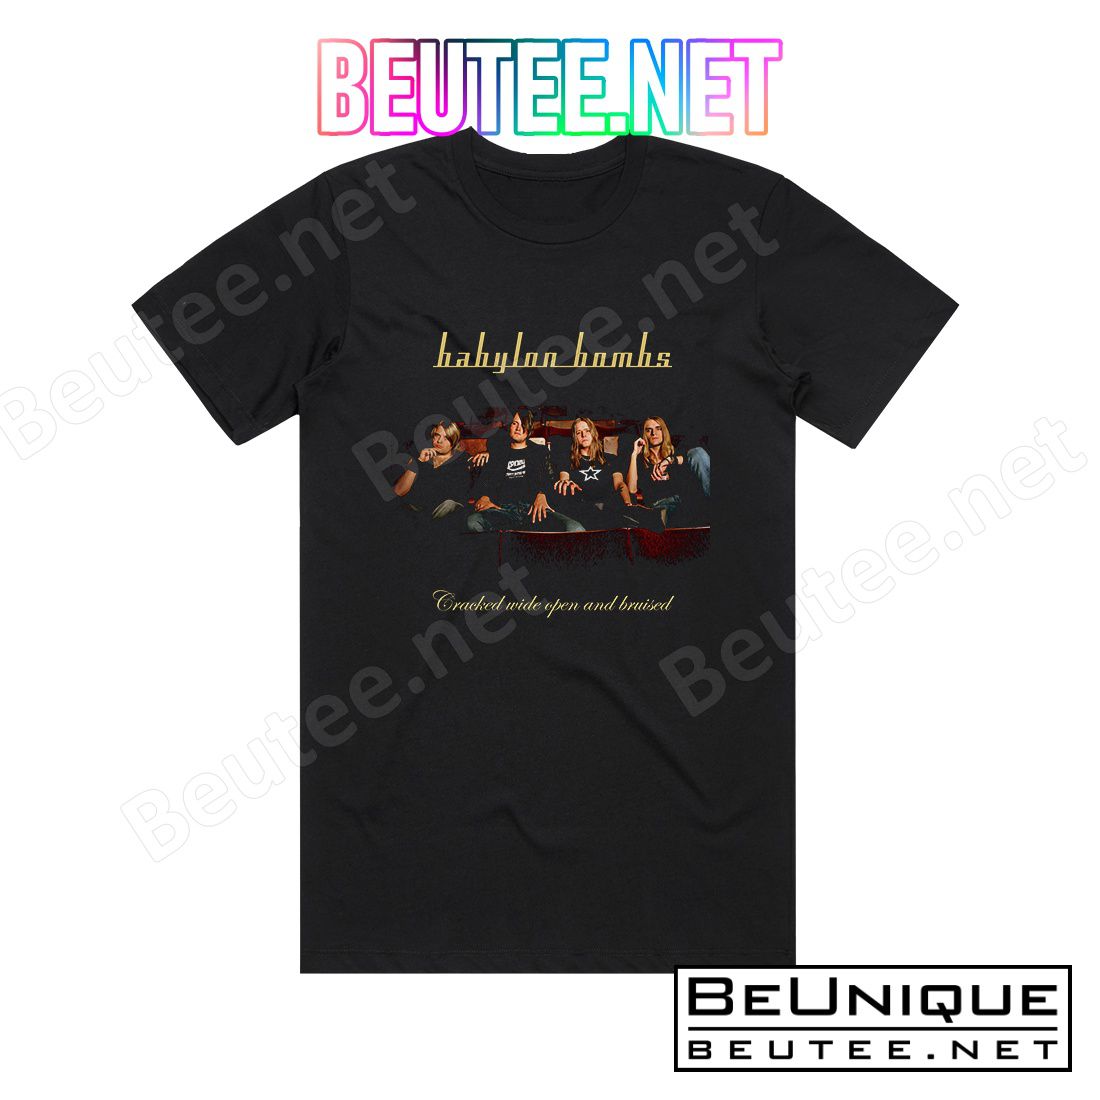 Babylon Bombs Cracked Wide Open And Bruised Album Cover T-Shirt